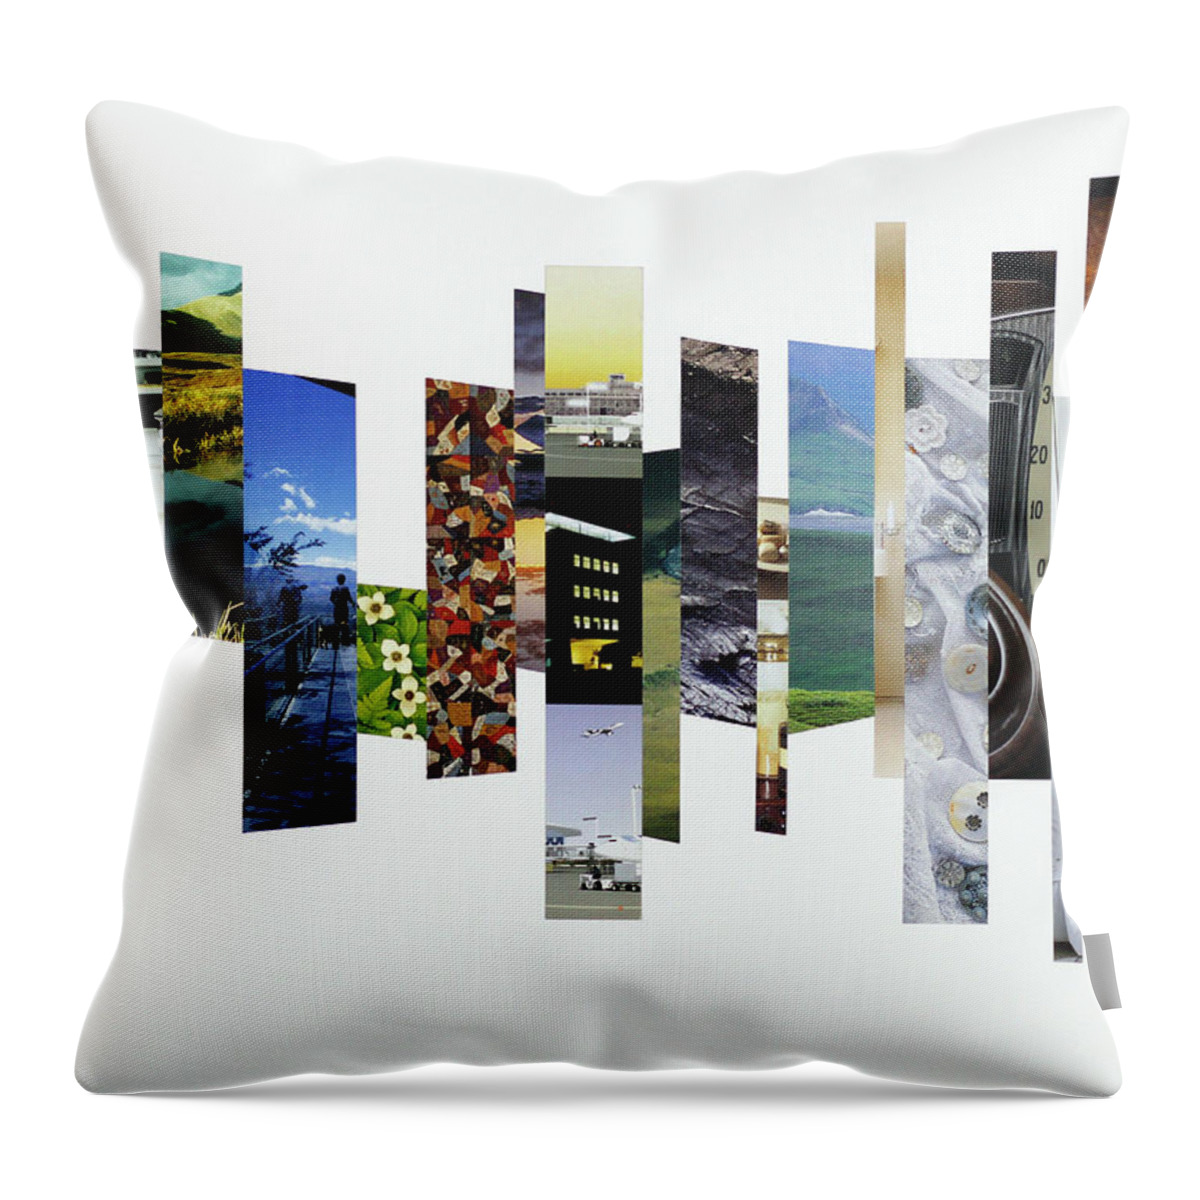 Collage Throw Pillow featuring the photograph Crosscut#121 by Robert Glover